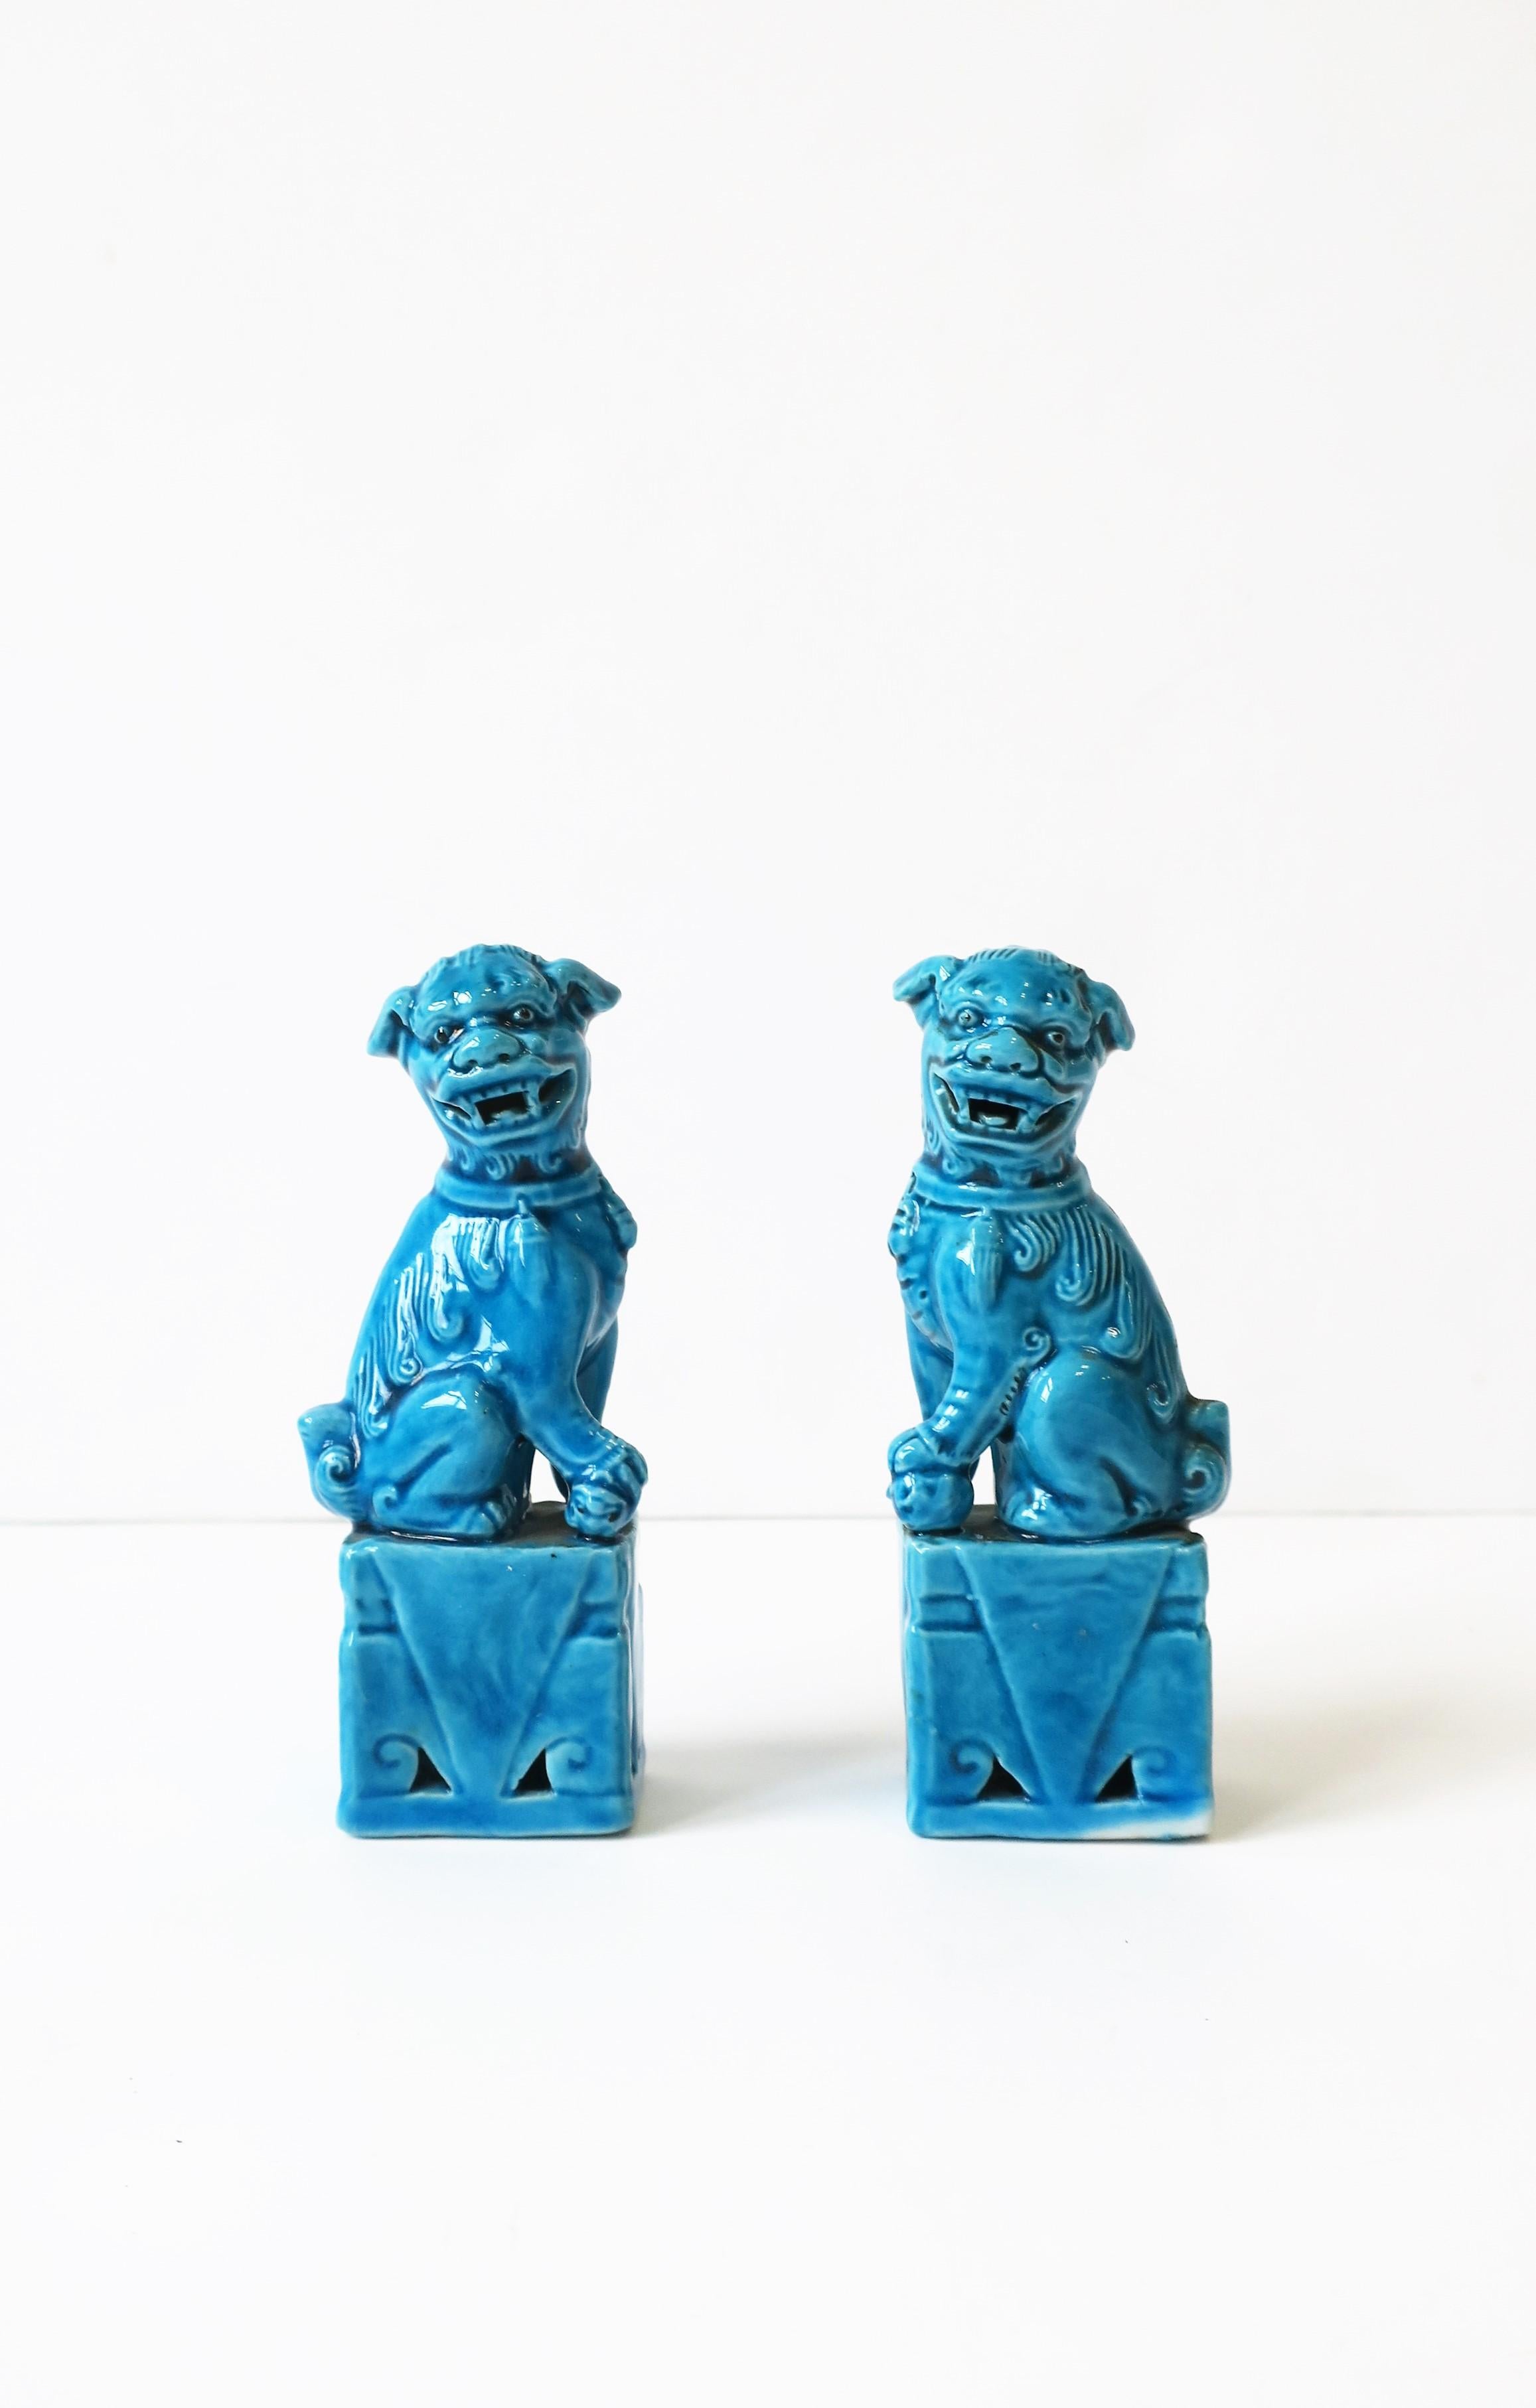 A beautiful small pair of ceramic turquoise blue lion foo dogs. 
Measurement: 4.25